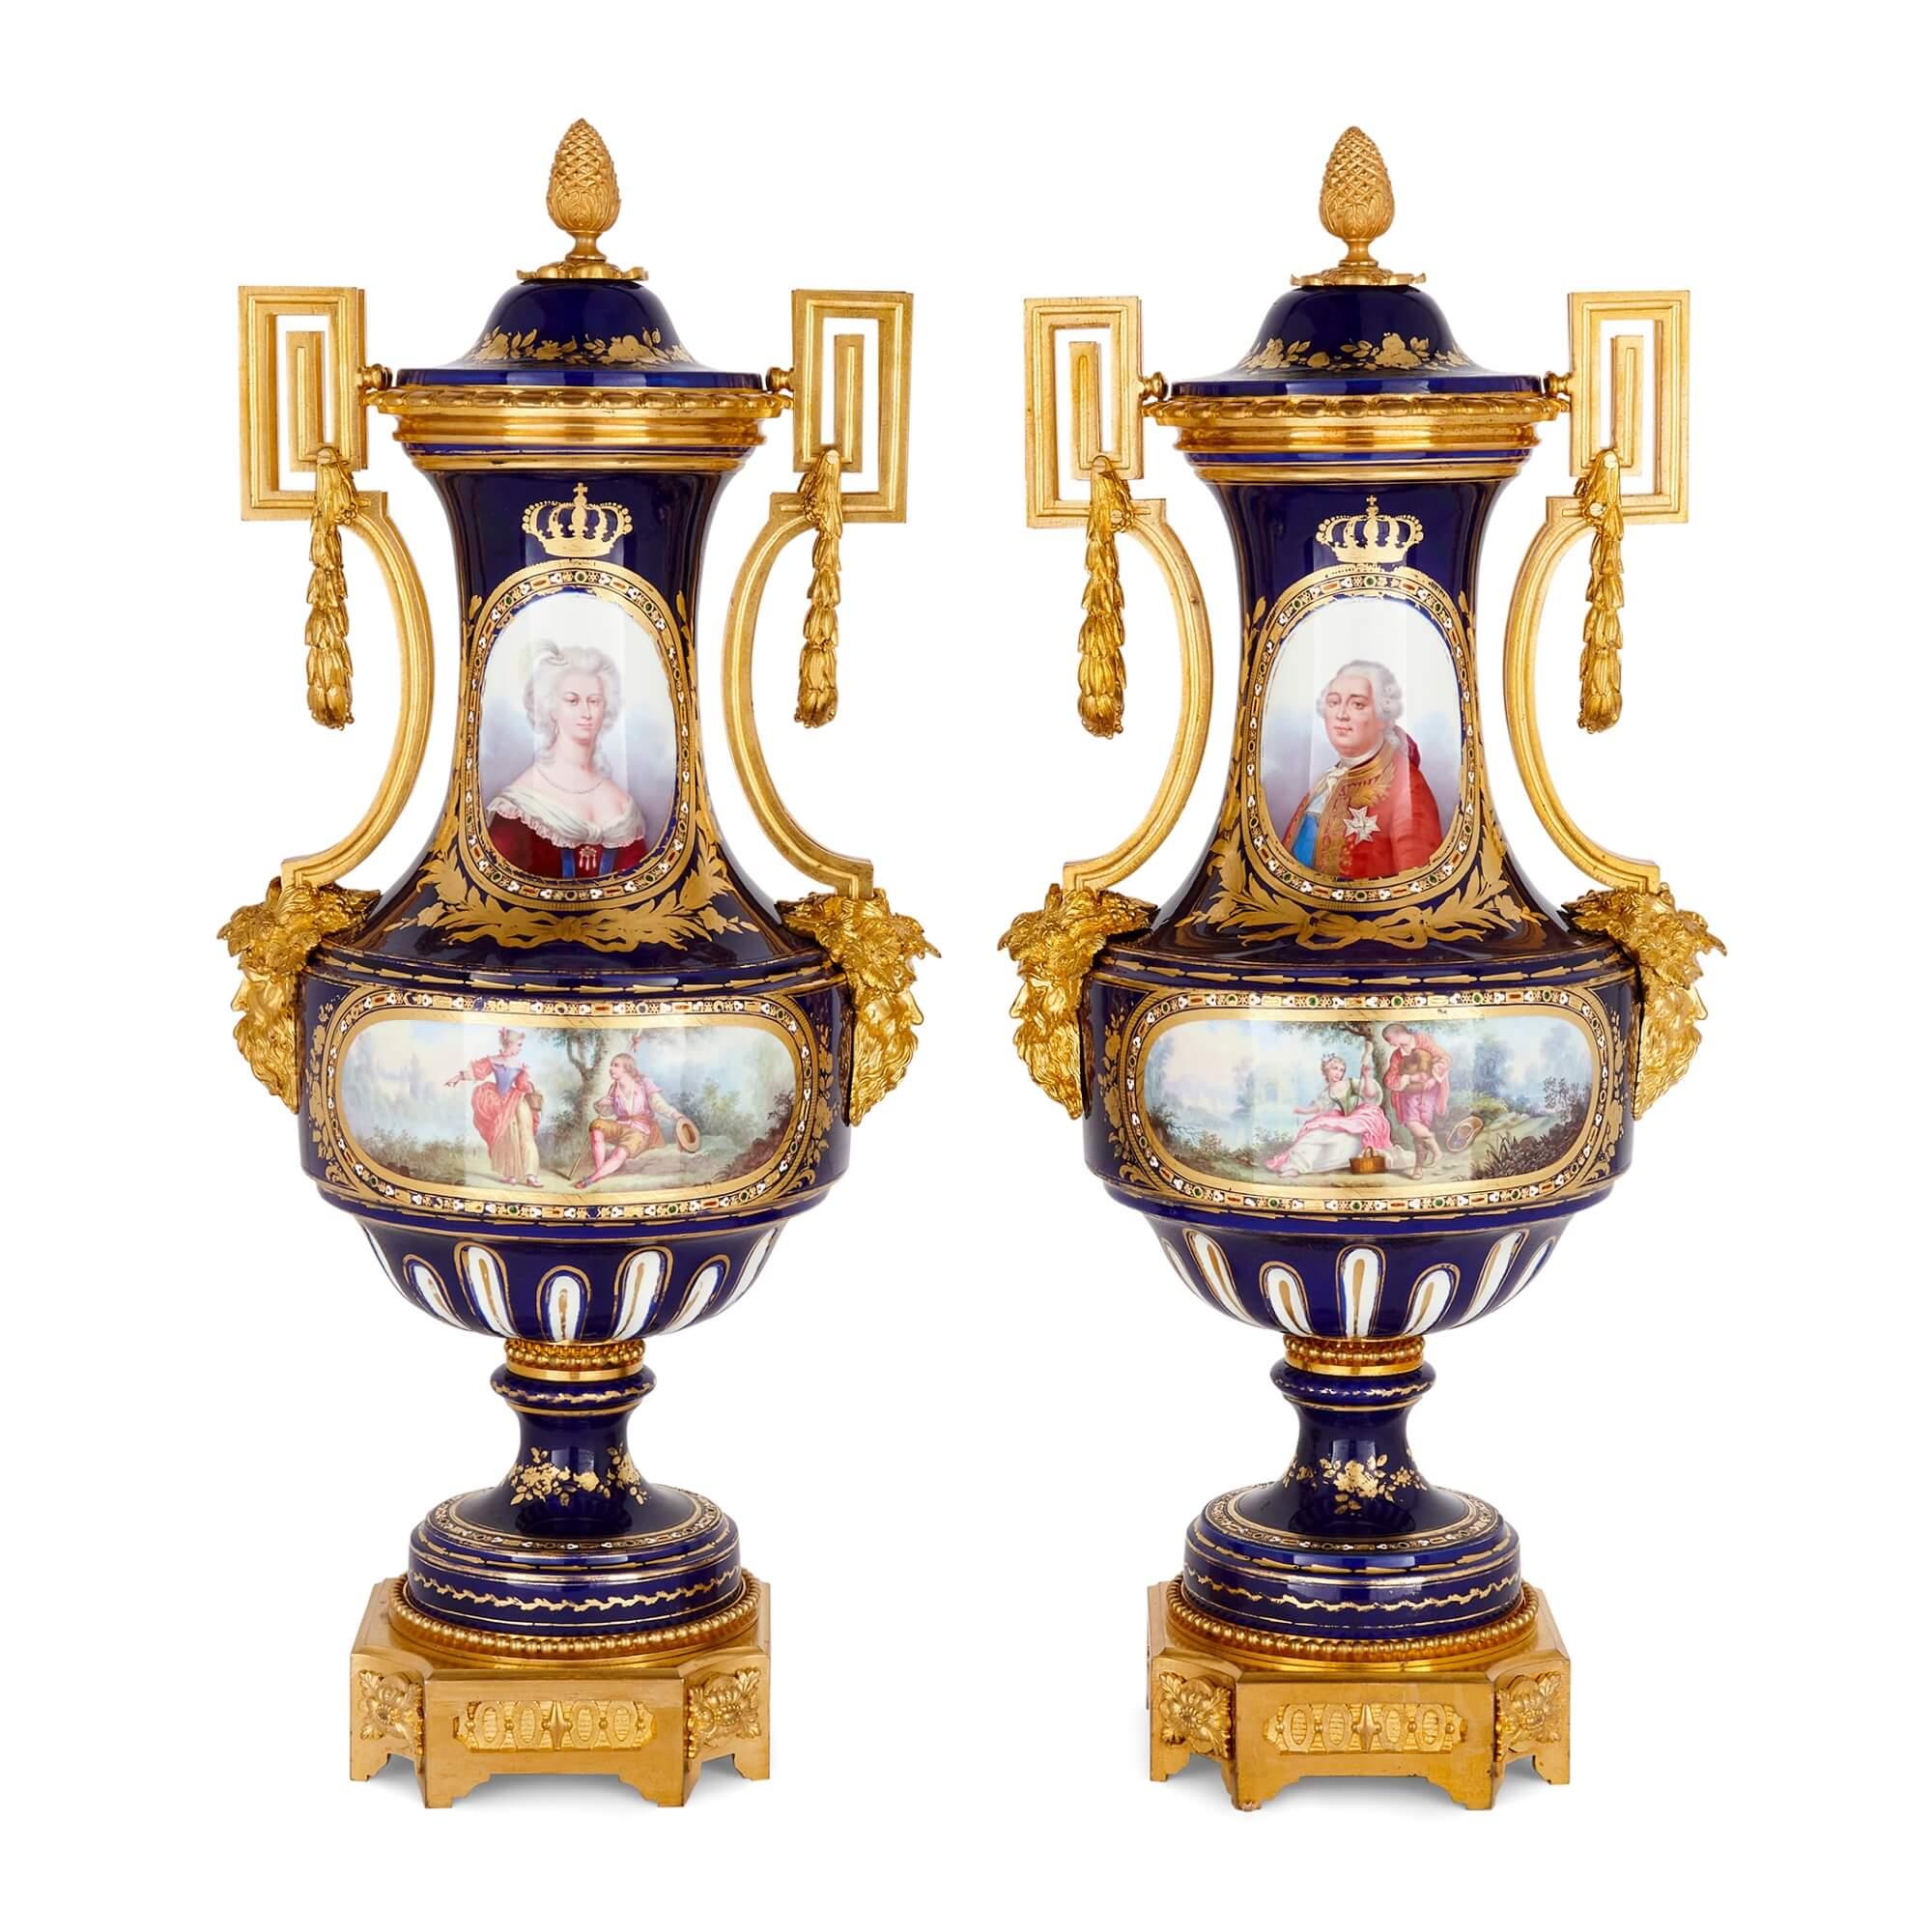 Pair of large ormolu mounted cobalt-blue ground jewelled porcelain vases 
French, Late 19th Century 
Height 68cm, width 30cm, depth 25cm

Made in the style of the renowned French Sèvres porcelain manufactory, this pair of superb vases is adorned